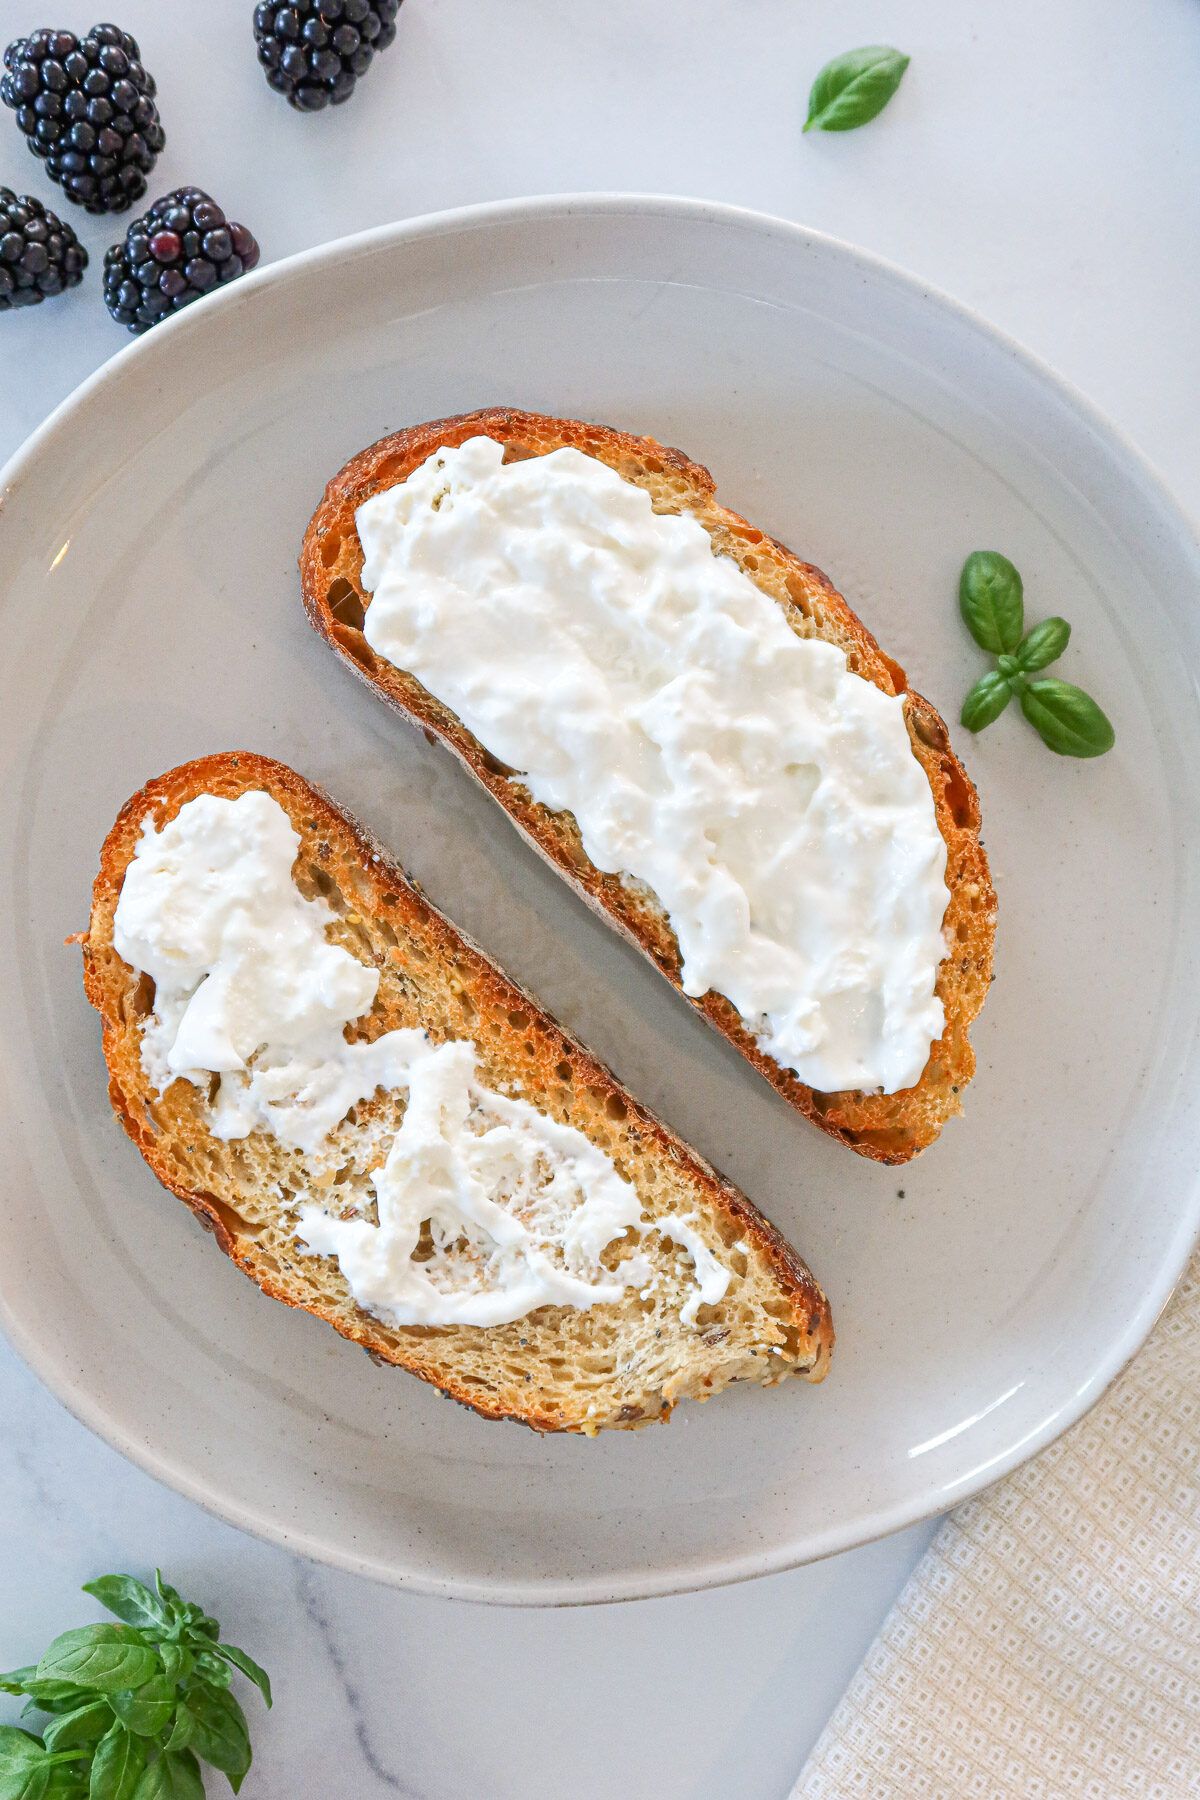 Spreading burrata cheese on top of the toast.